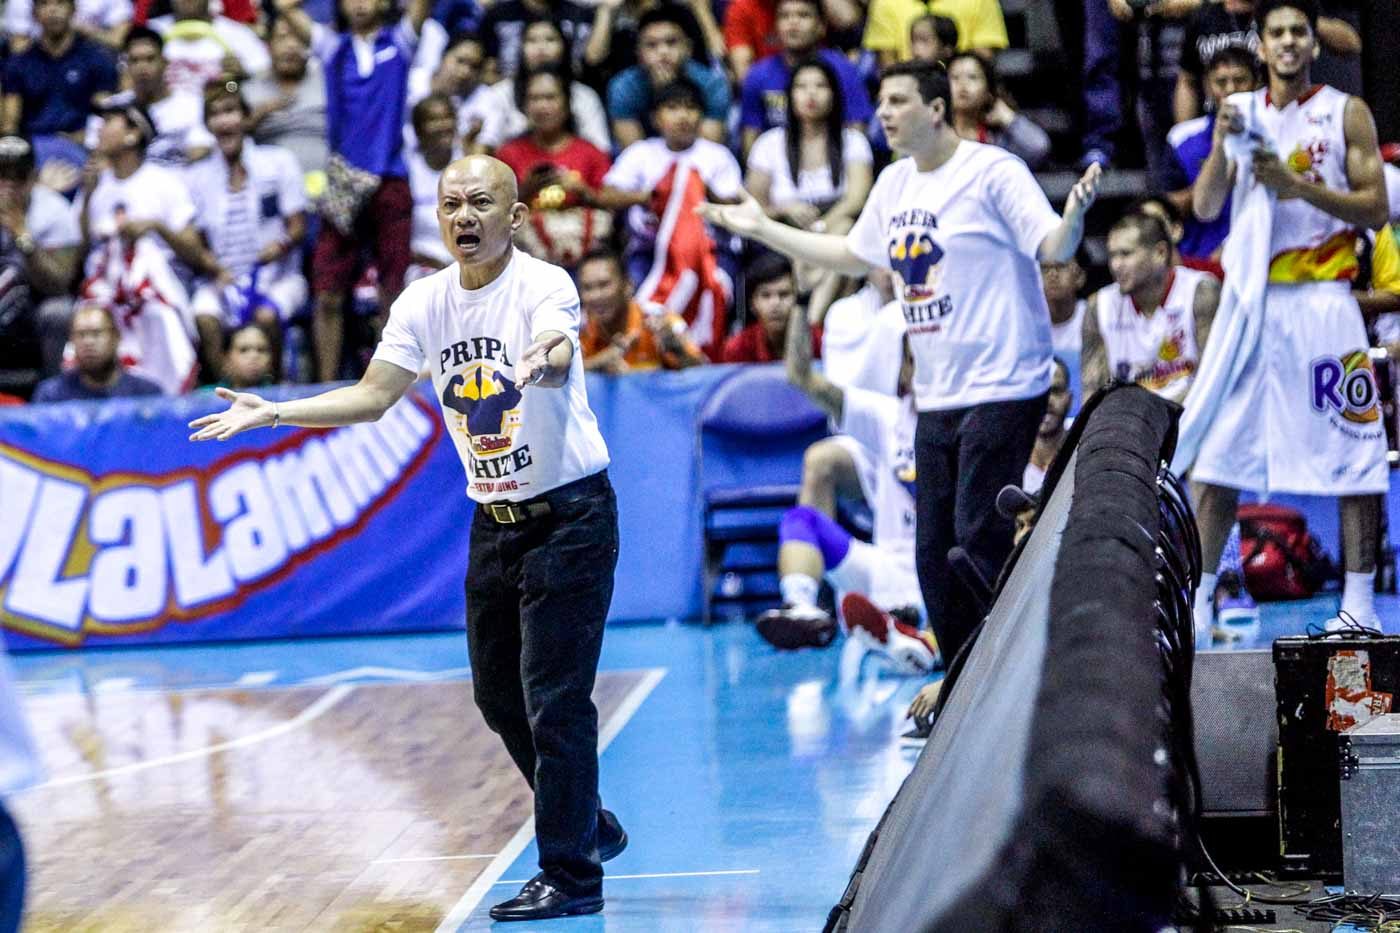 Guiao: ‘I’m still very positive we will win this championship’